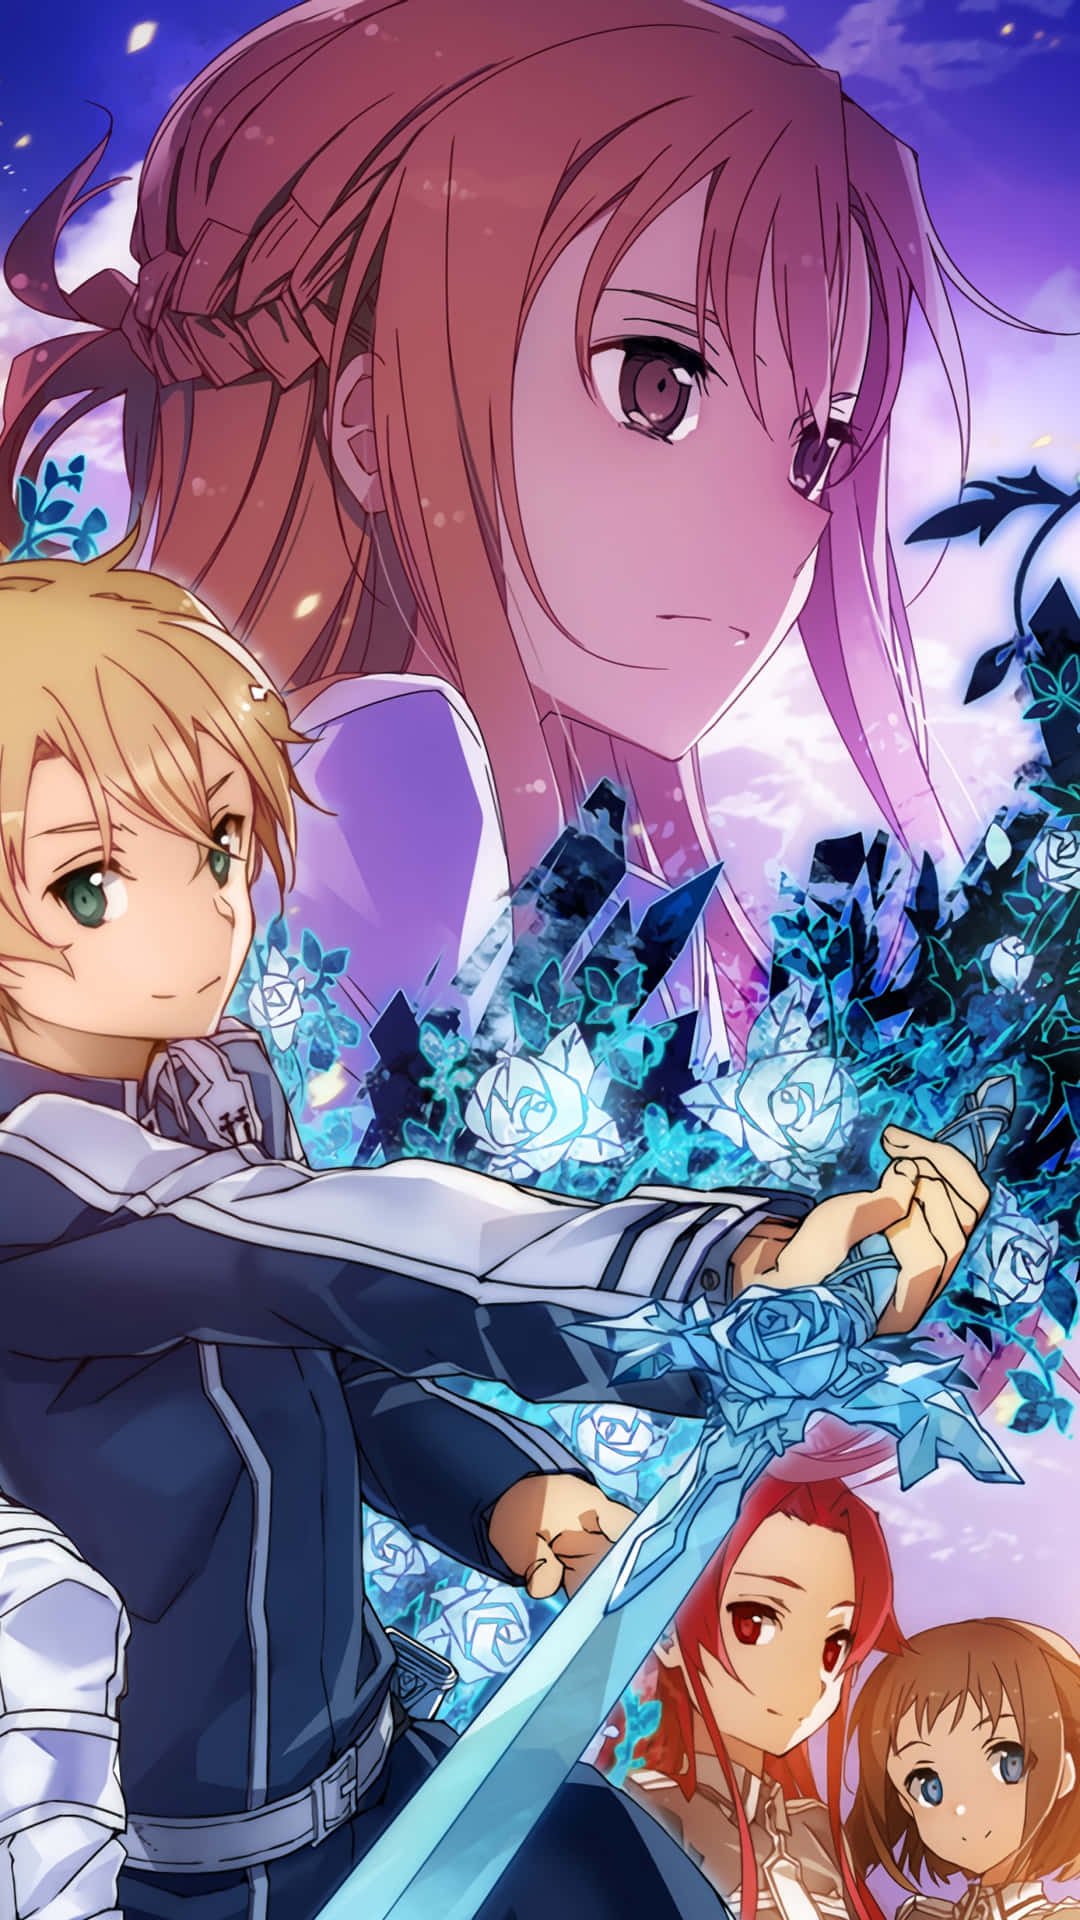 Get the latest technology with Sao Phone Wallpaper